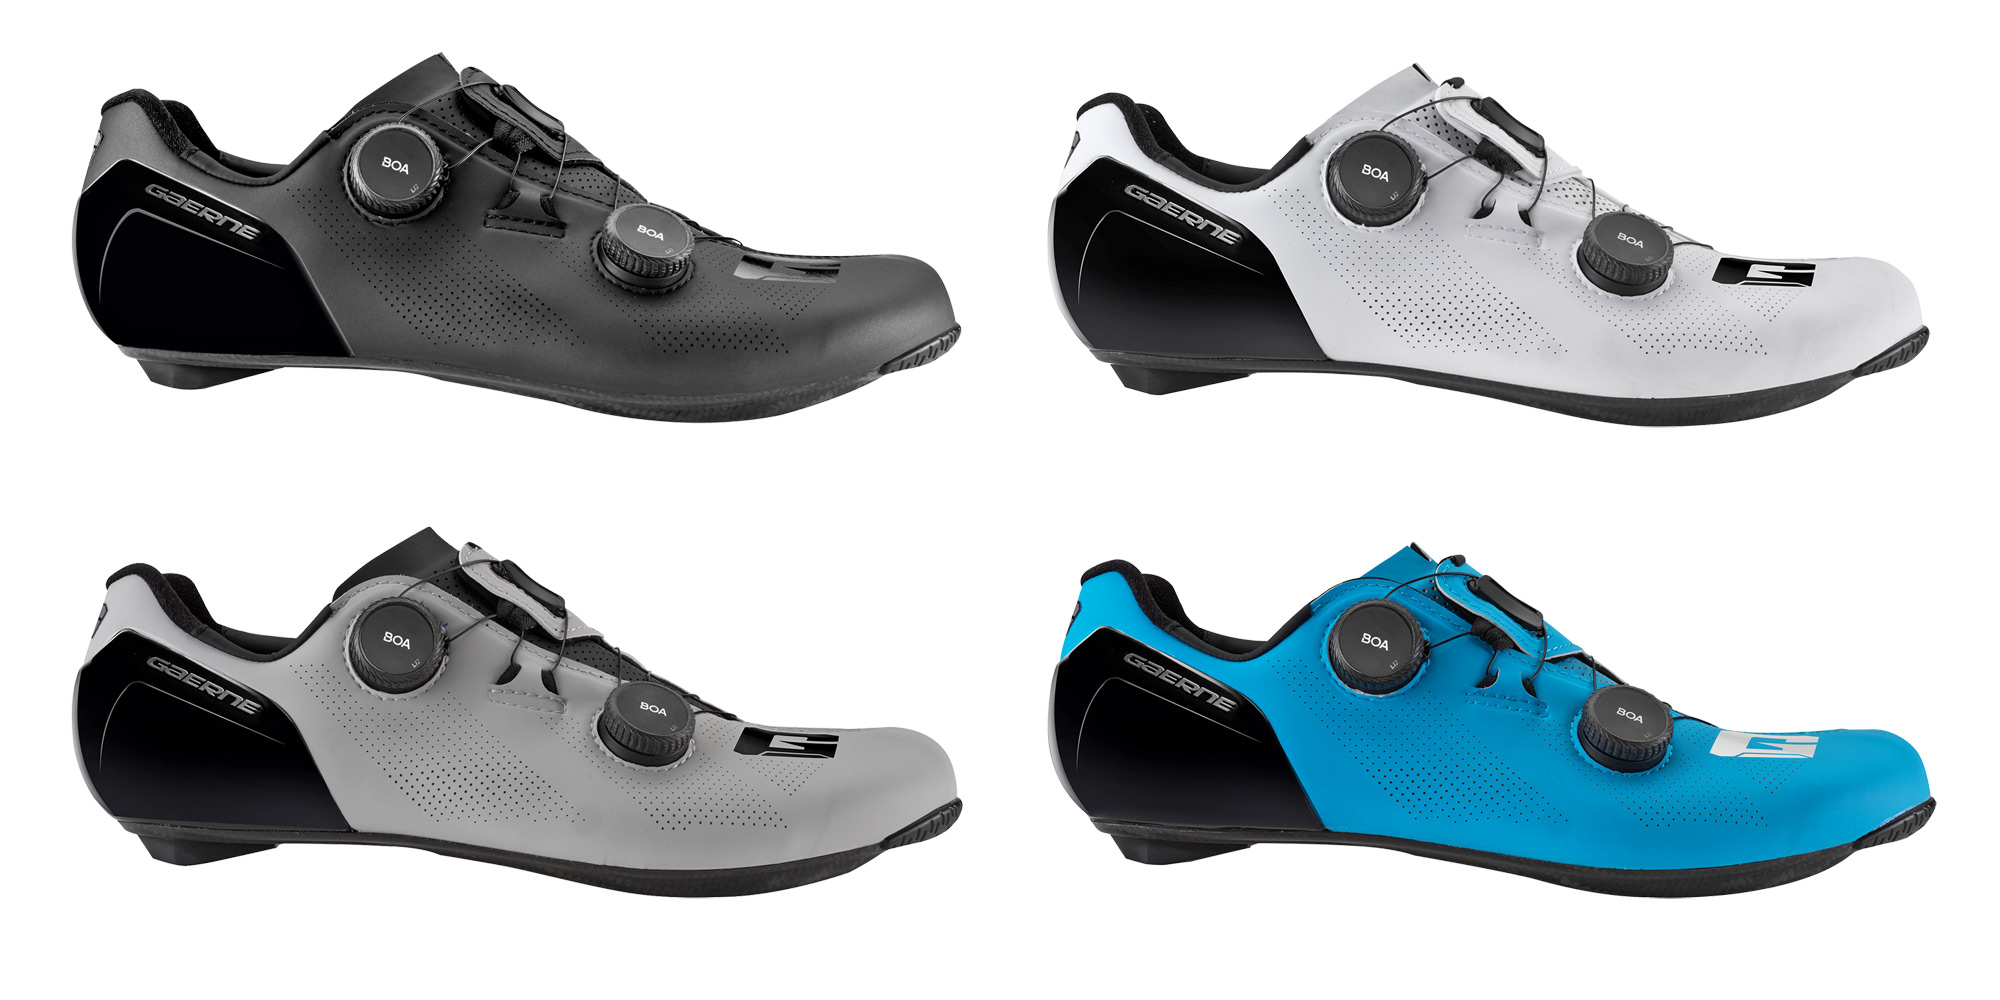 Gaerne-G.STL-road-shoes_top-tier-made-in-Italy-performance-carbon-road-race-bike-shoe_colors.jpg